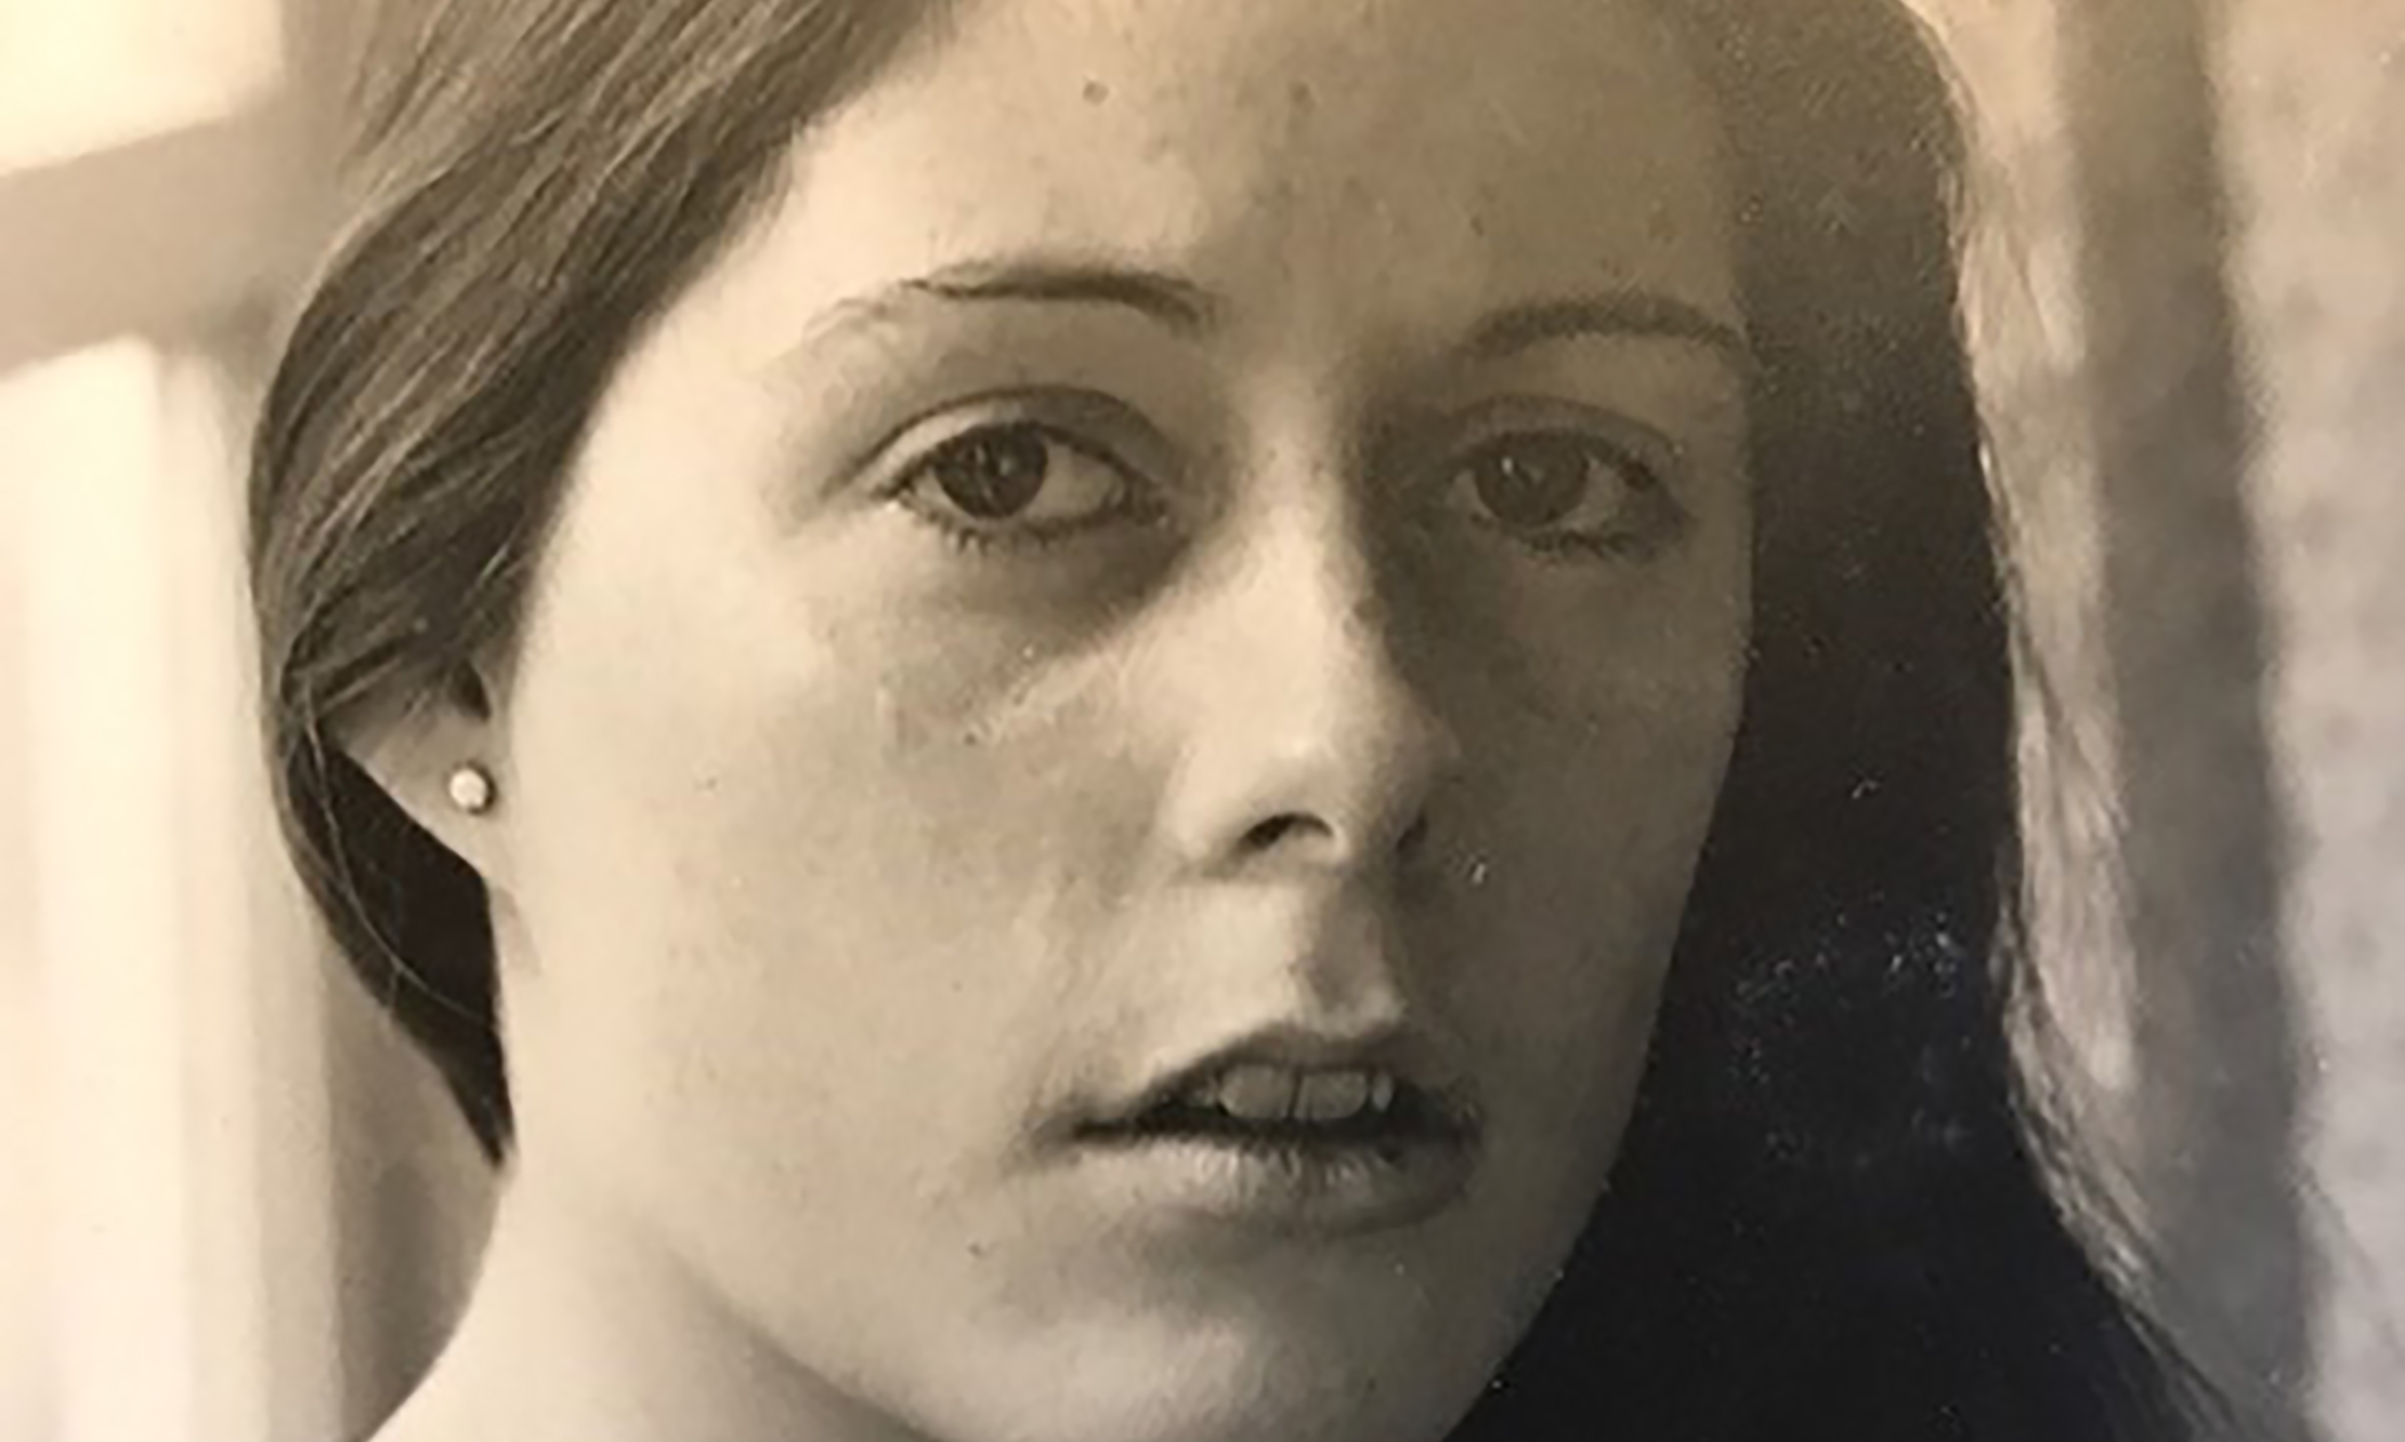 Laurie Halse Anderson, pictured in 1979, broke barriers with a 1999 novel about a teen’s sexual assault. Now she’s sharing her own story (Courtesy Laurie Halse Anderson)